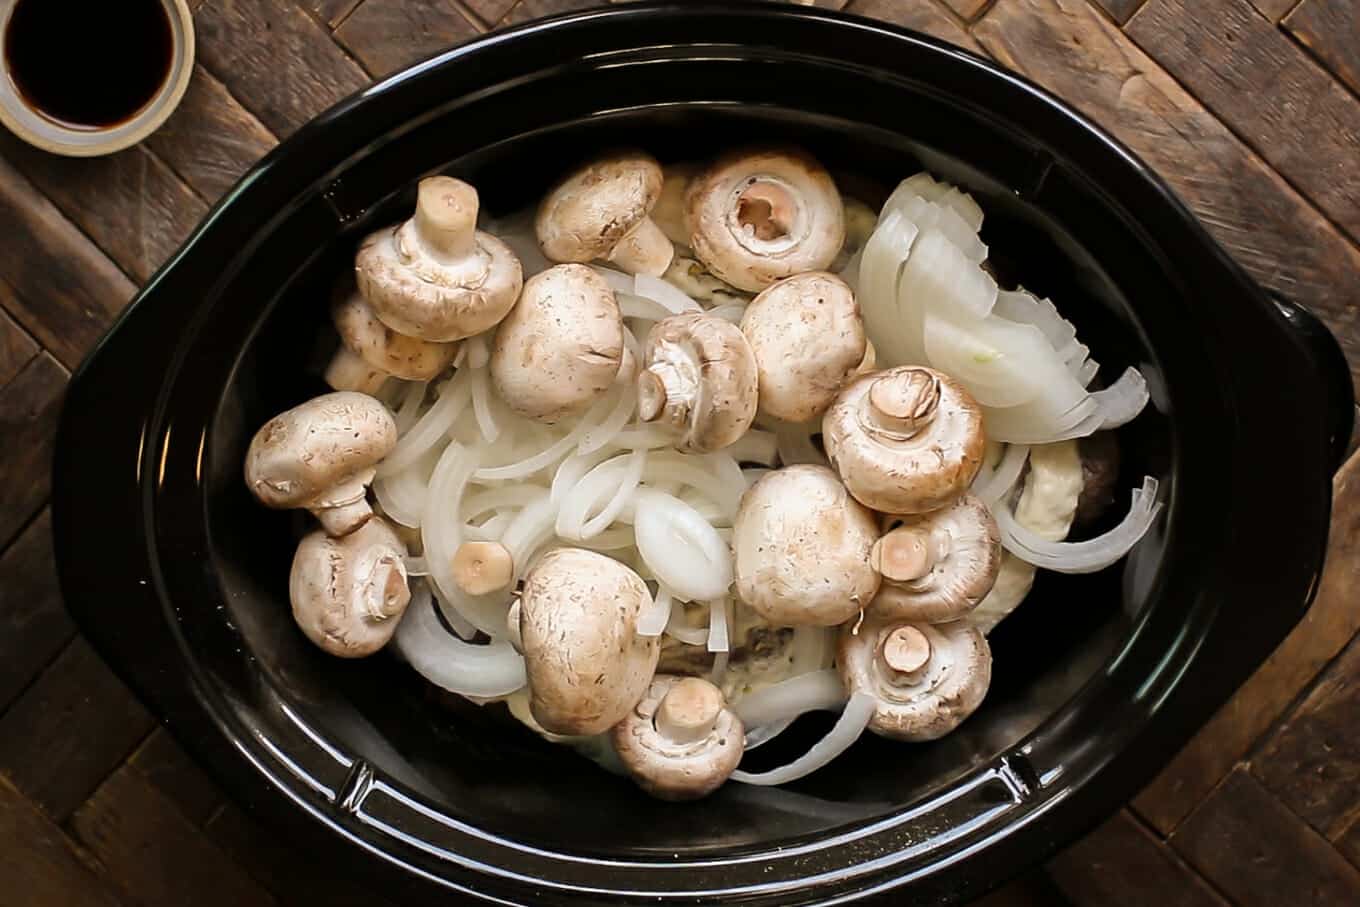 raw onions and mushrooms on top of a roast.